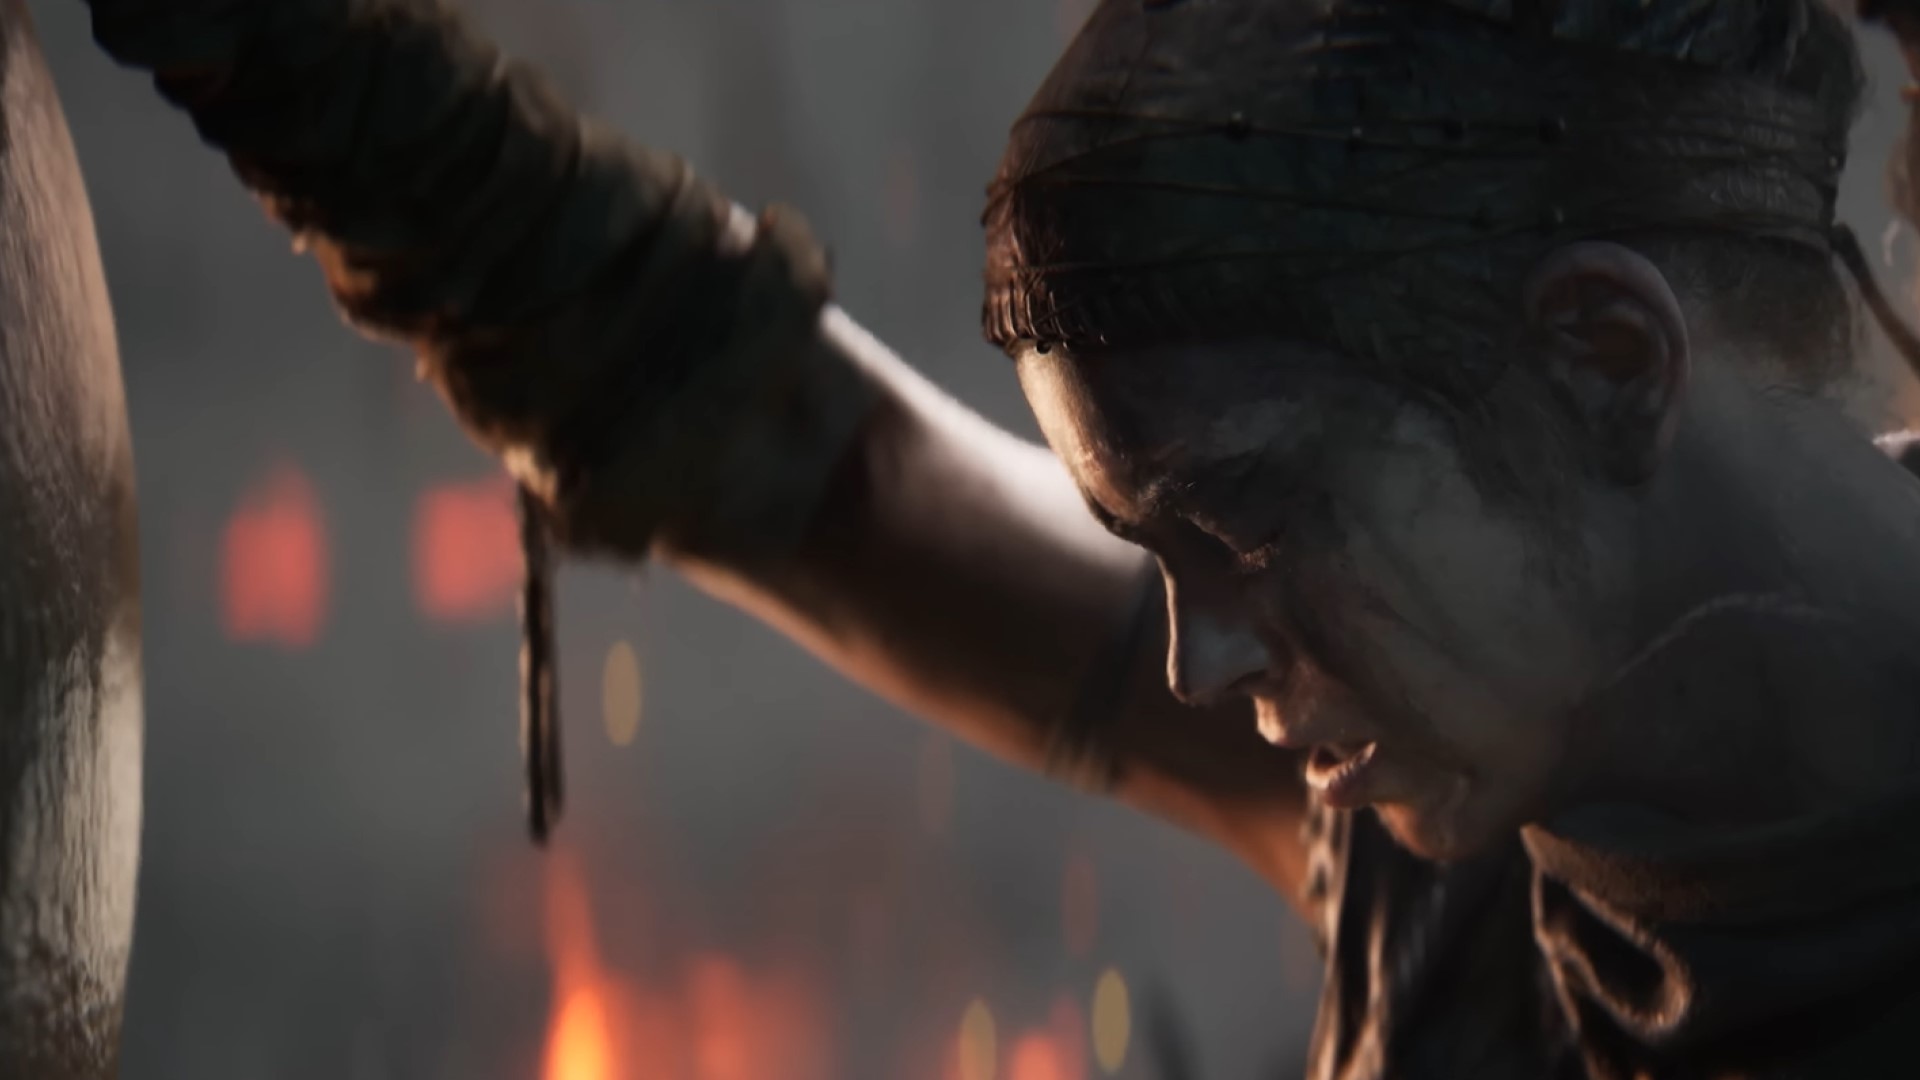 Hellblade 2 Developer Feels “a Lot of People” Prefer Shorter Games to 100-Hour Experiences